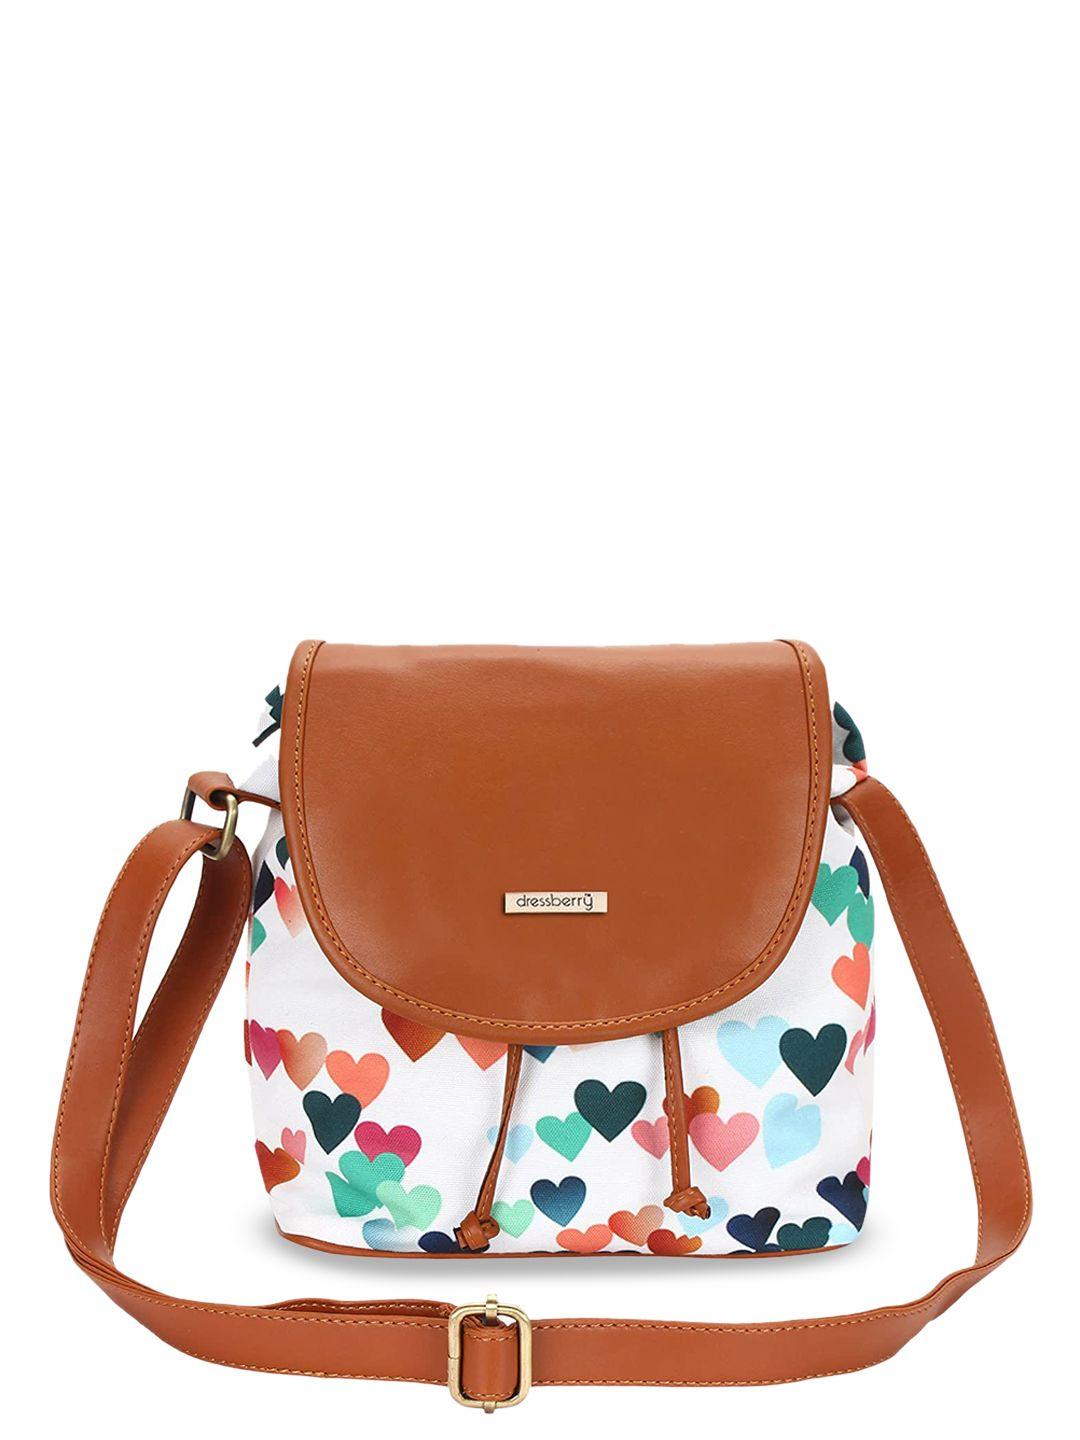 dressberry-girls-graphic-printed-structured-sling-bag